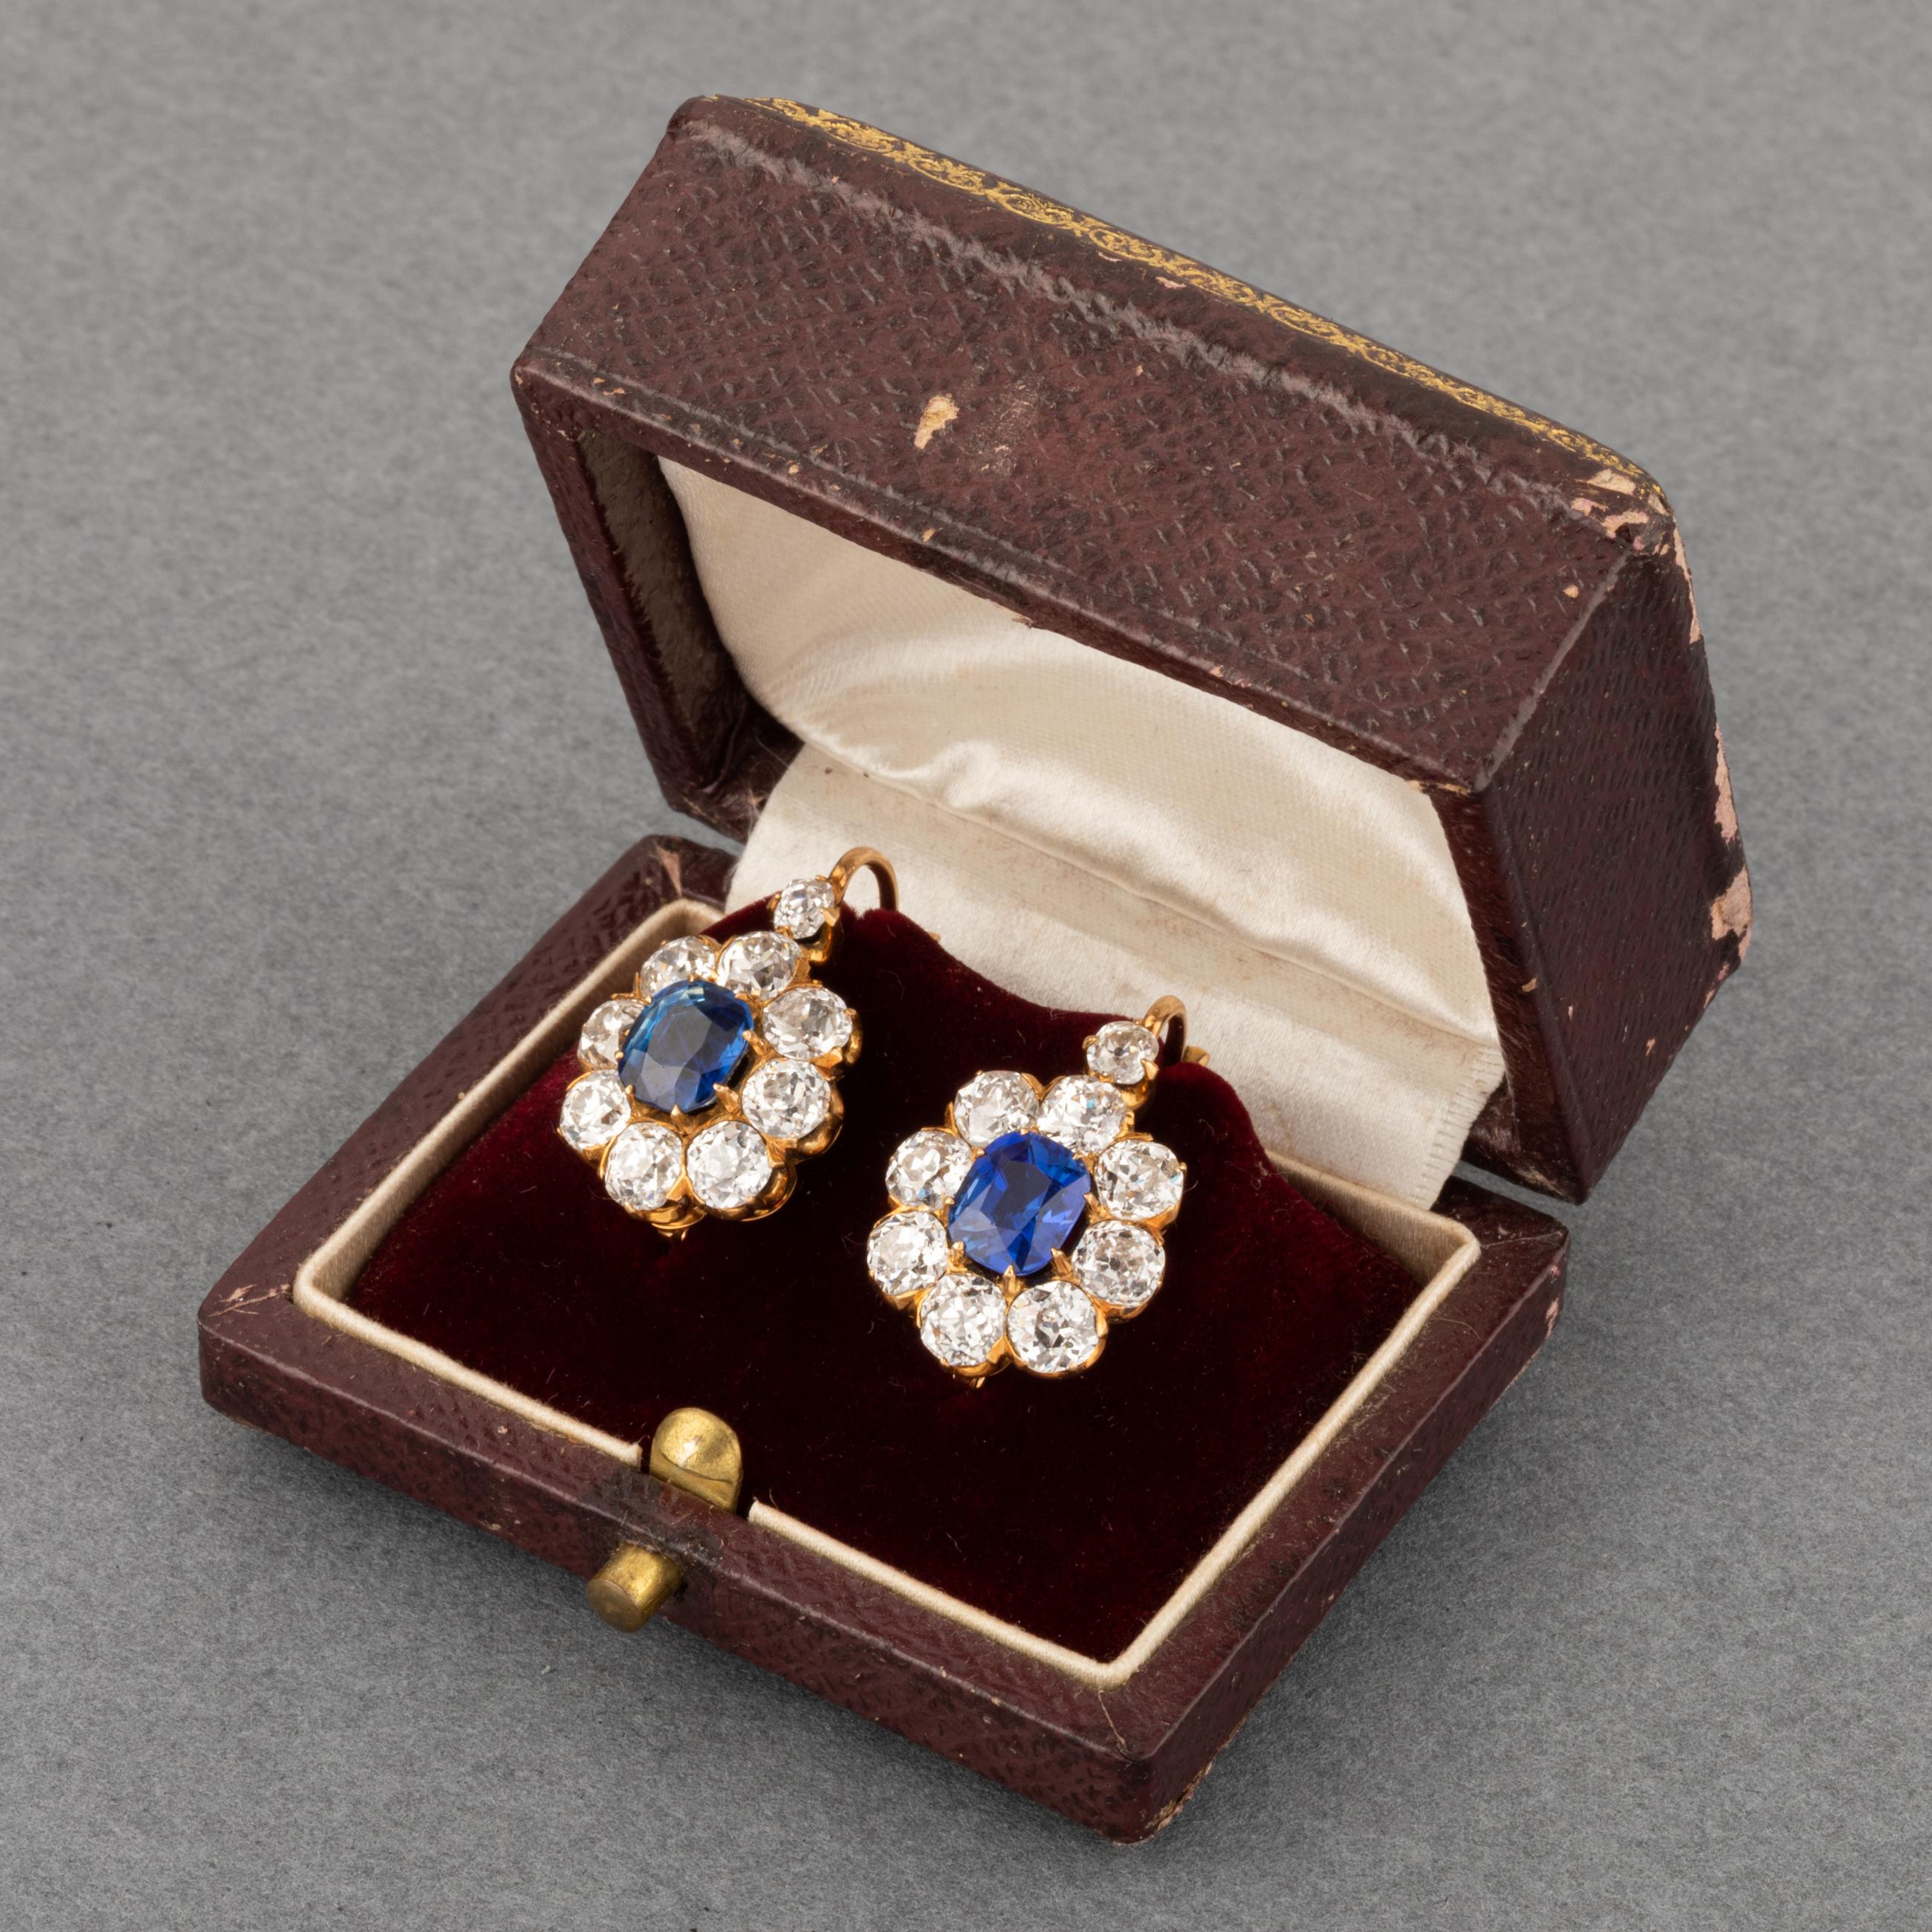 Late Victorian 4.20 Carats Diamonds and 2.20 Carats Sapphires French Antique Earrings For Sale